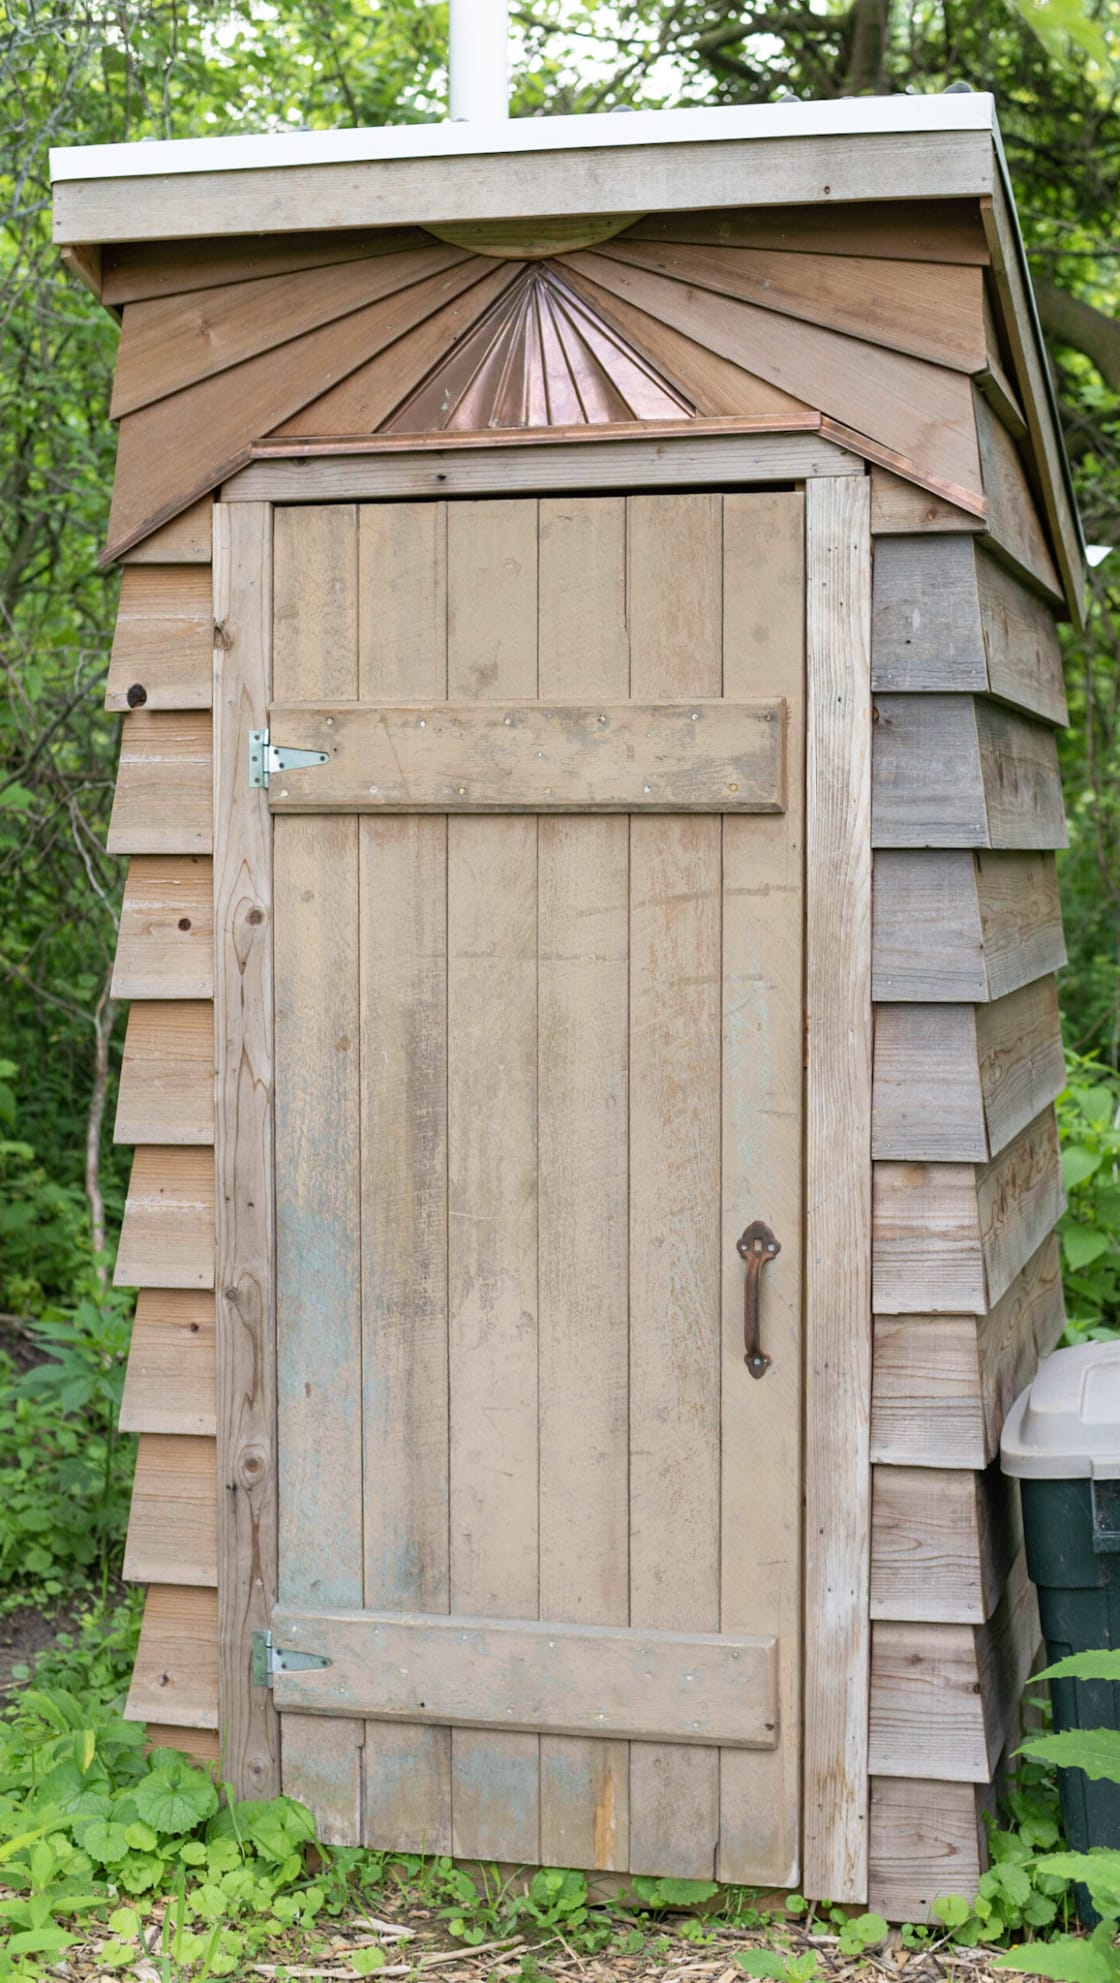 The most beautiful outhouse!